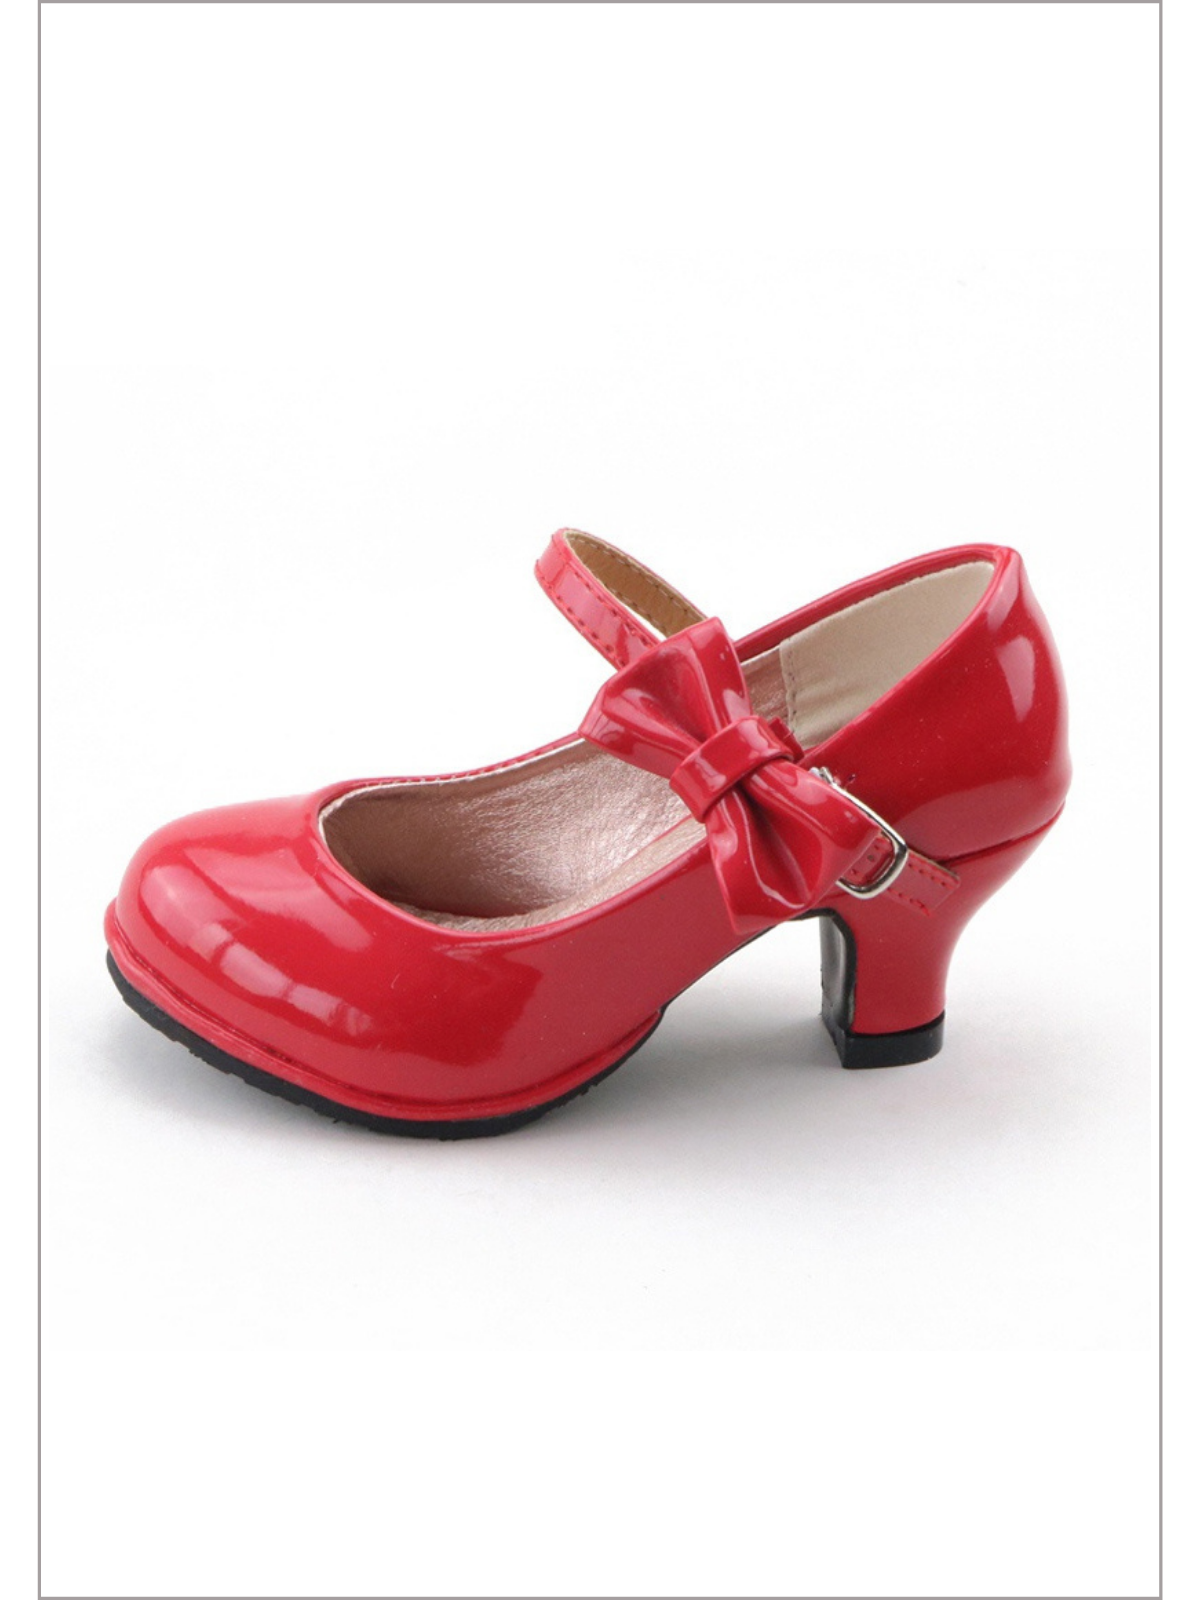 Girls Shoes By Liv and Mia | Red Bow-Embellished Mary Jane Heels